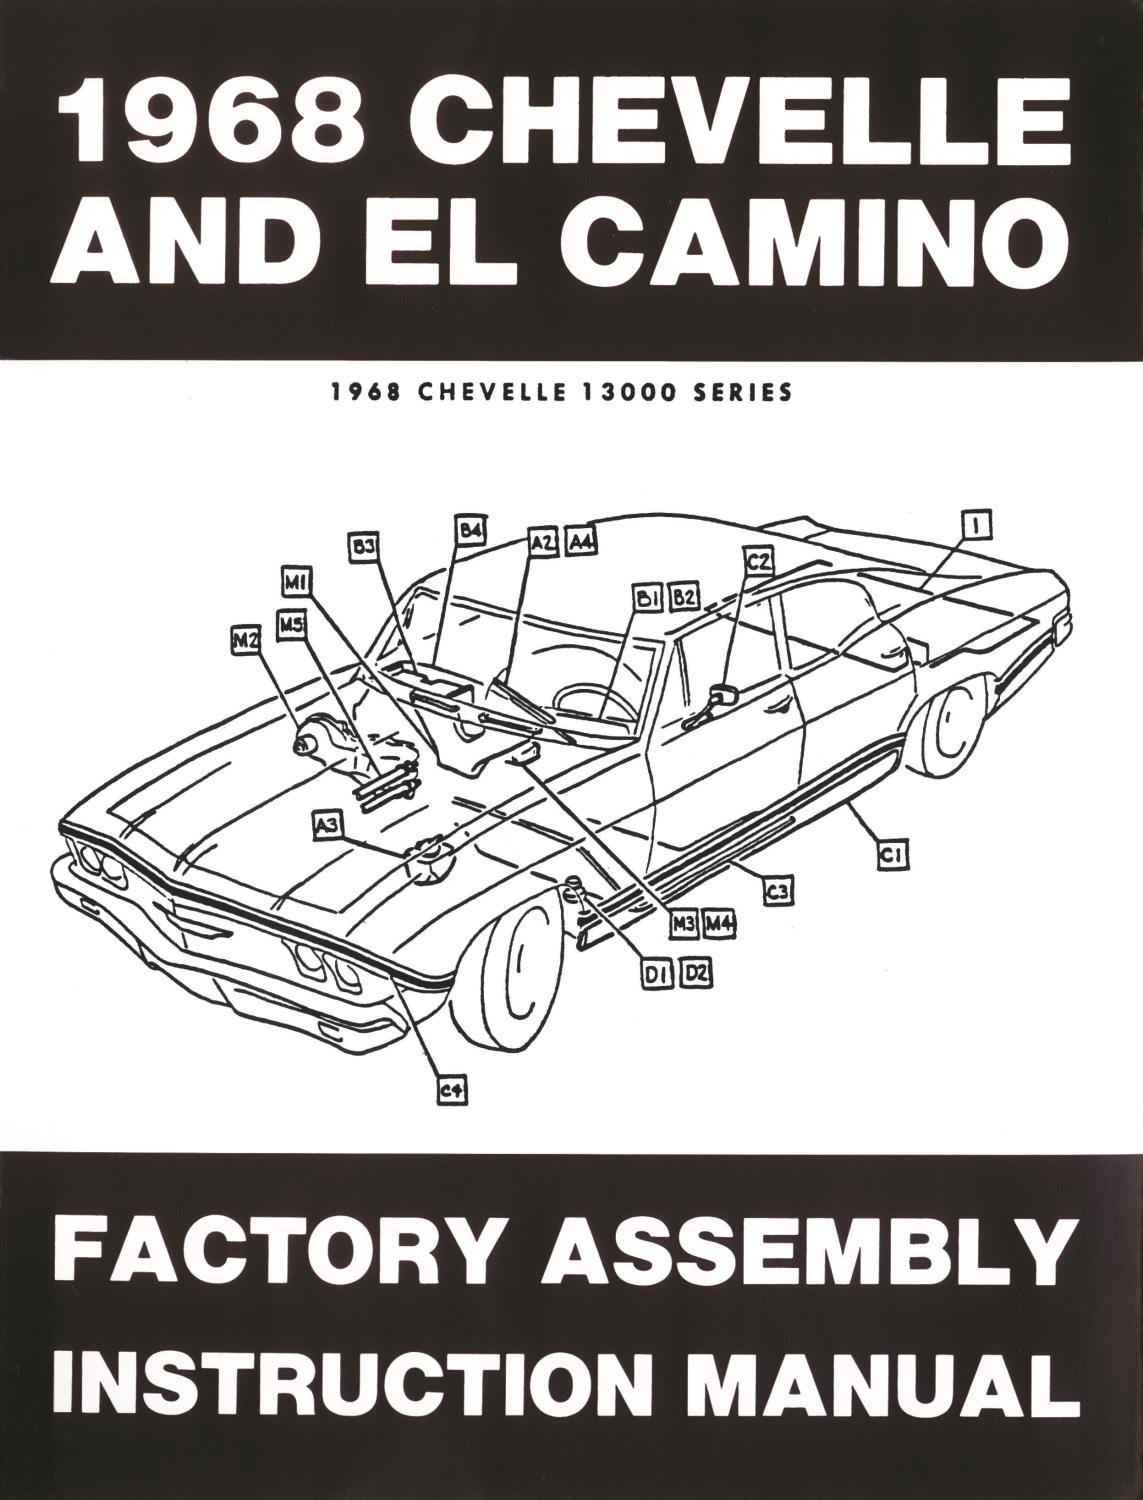 Factory Assembly Instruction Manual for 1968 Chevrolet Chevelle and El Camino